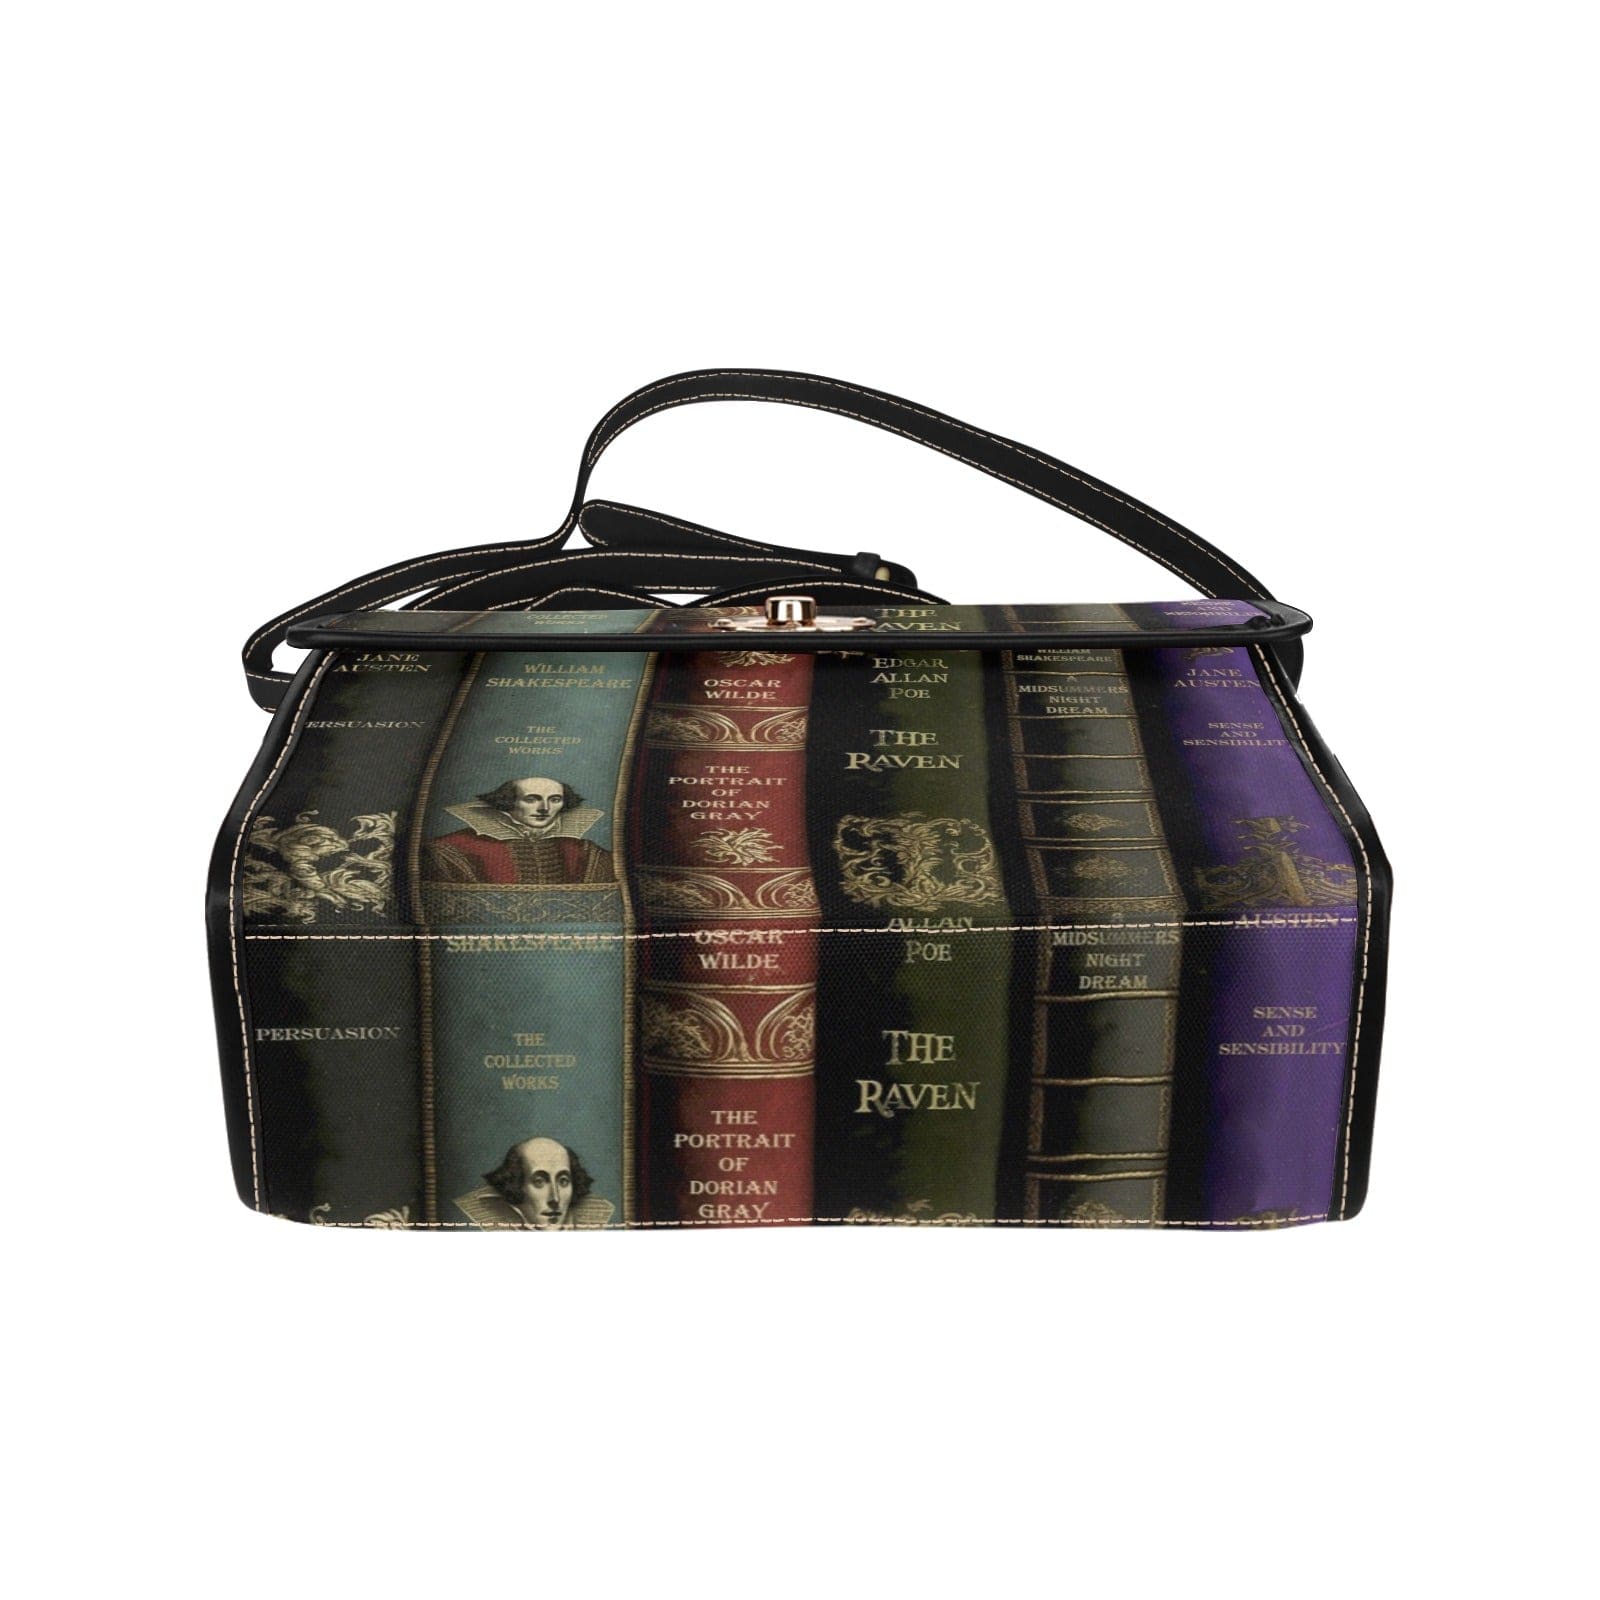 showing the base of the satchel handbag printed with spines of classic literature titles in dark colours